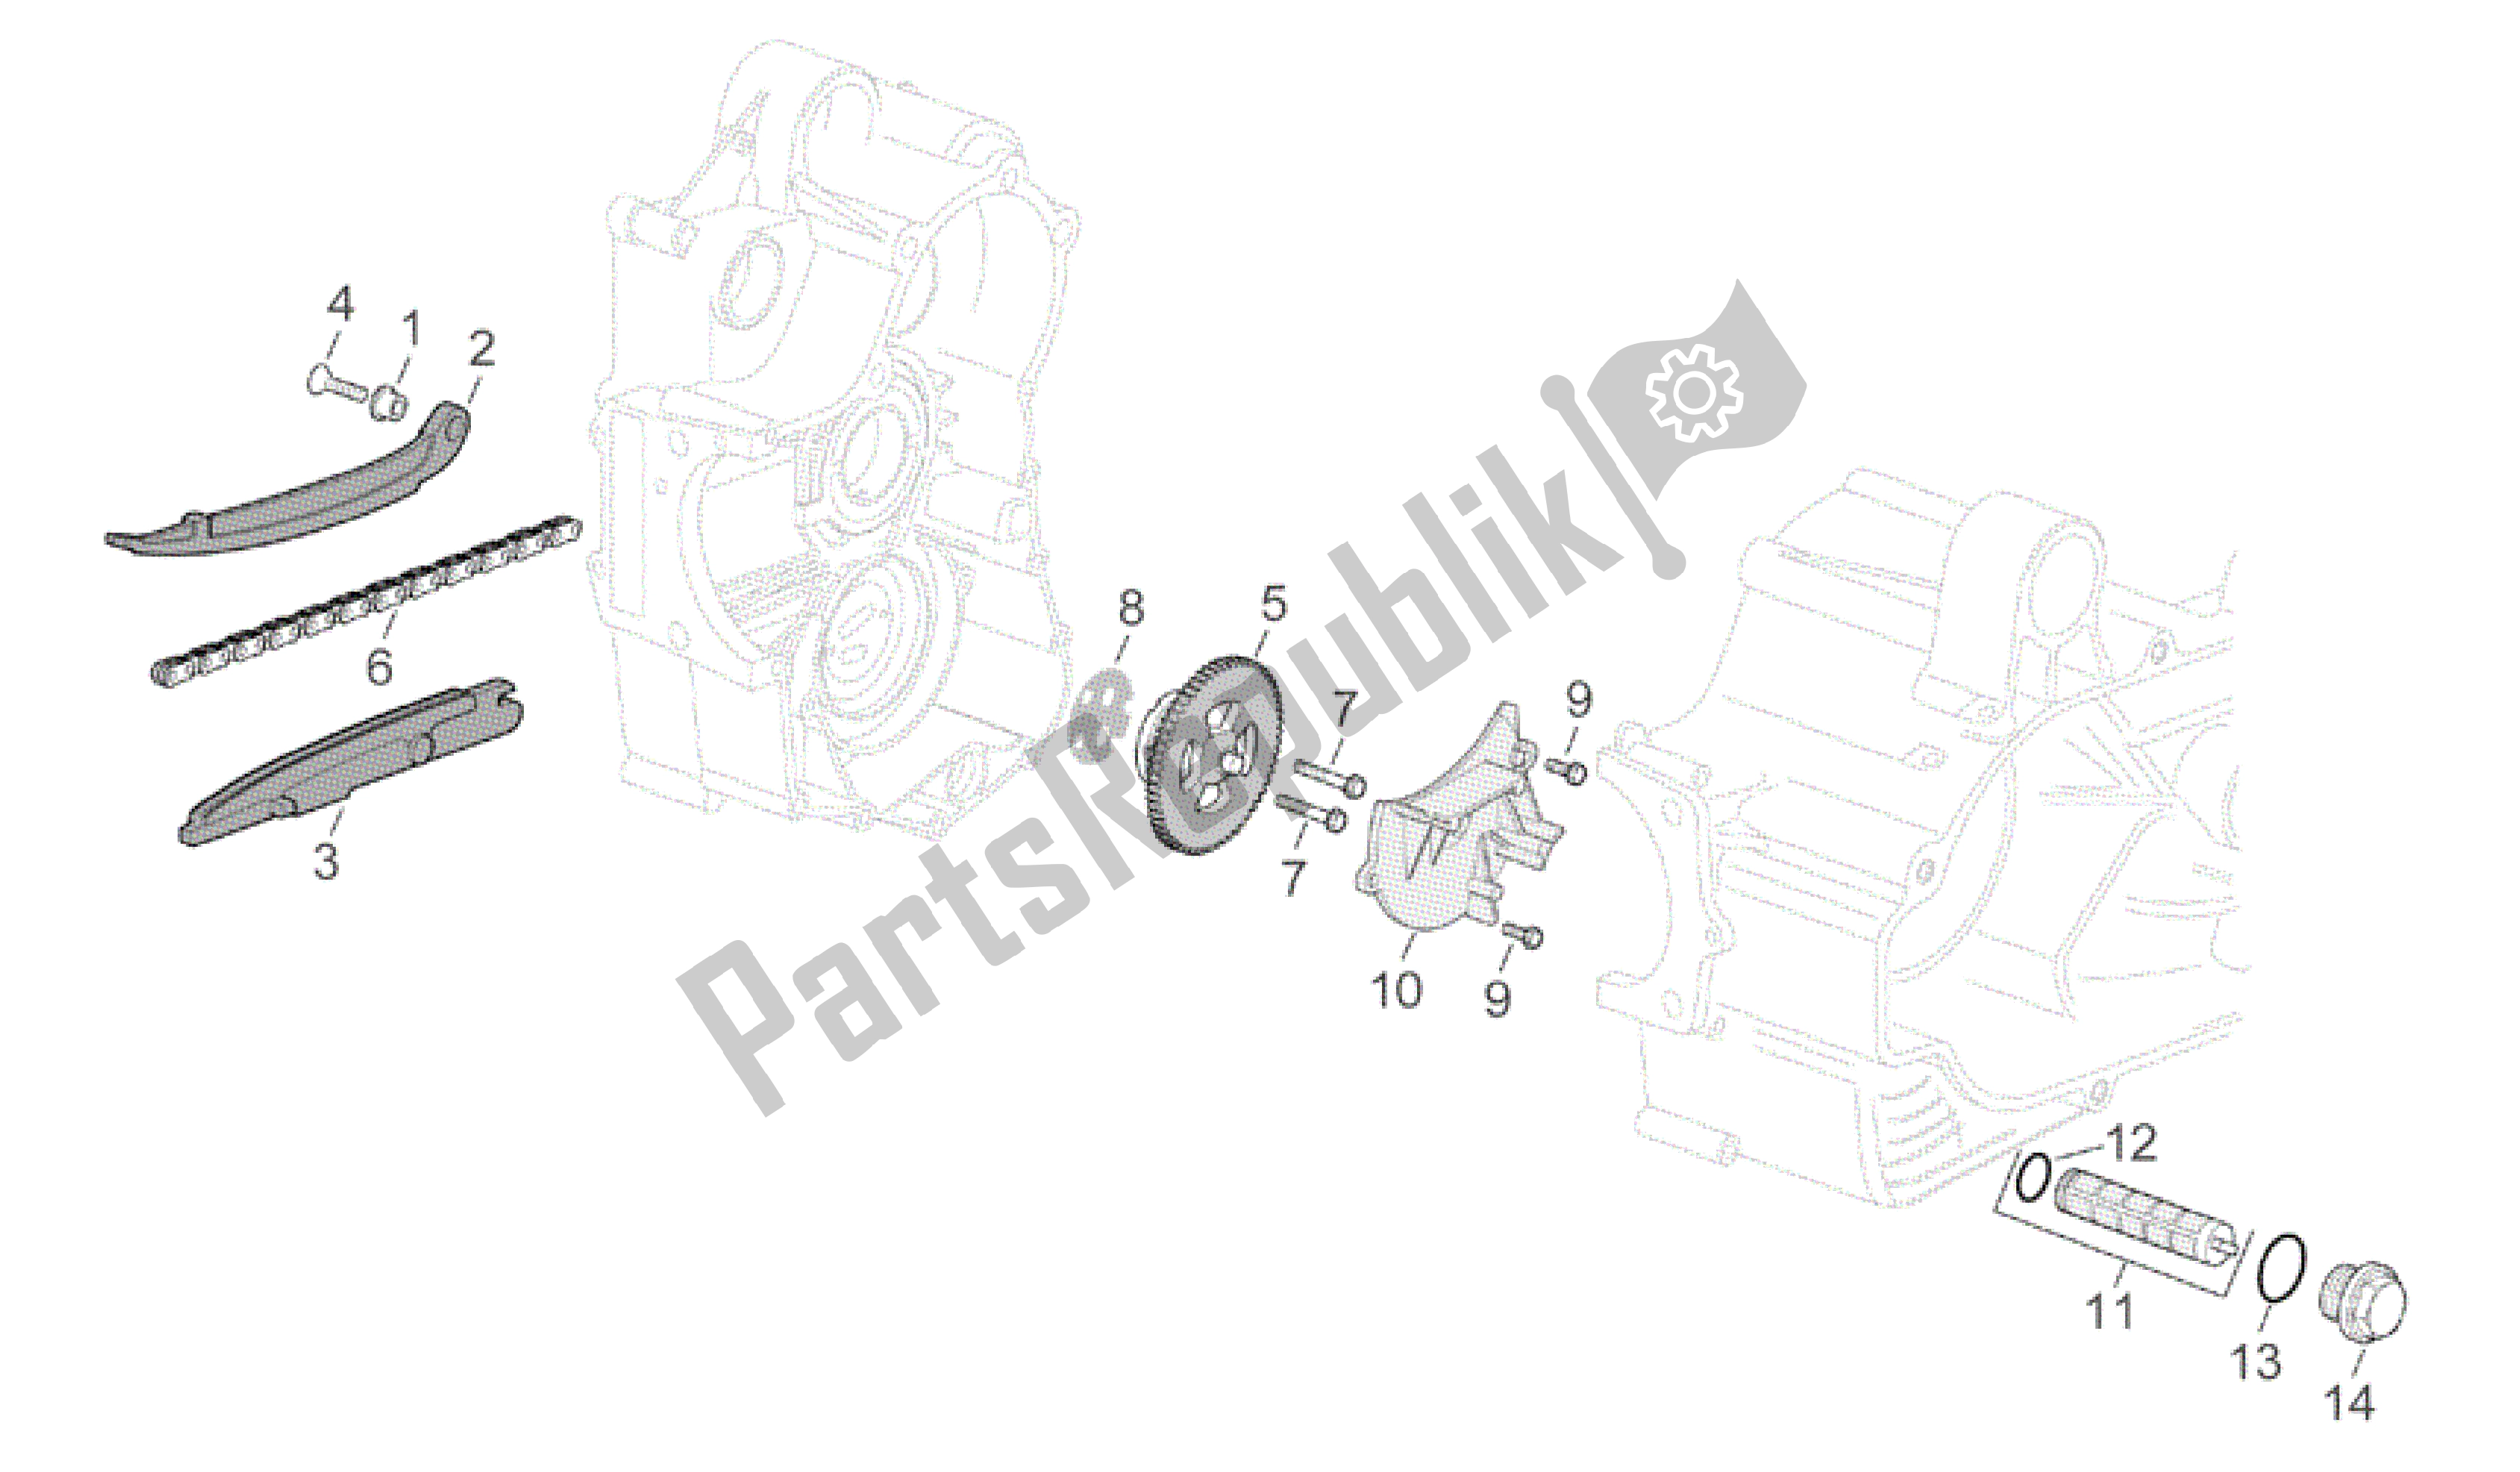 All parts for the Oil Pump of the Aprilia Scarabeo 500 2003 - 2006